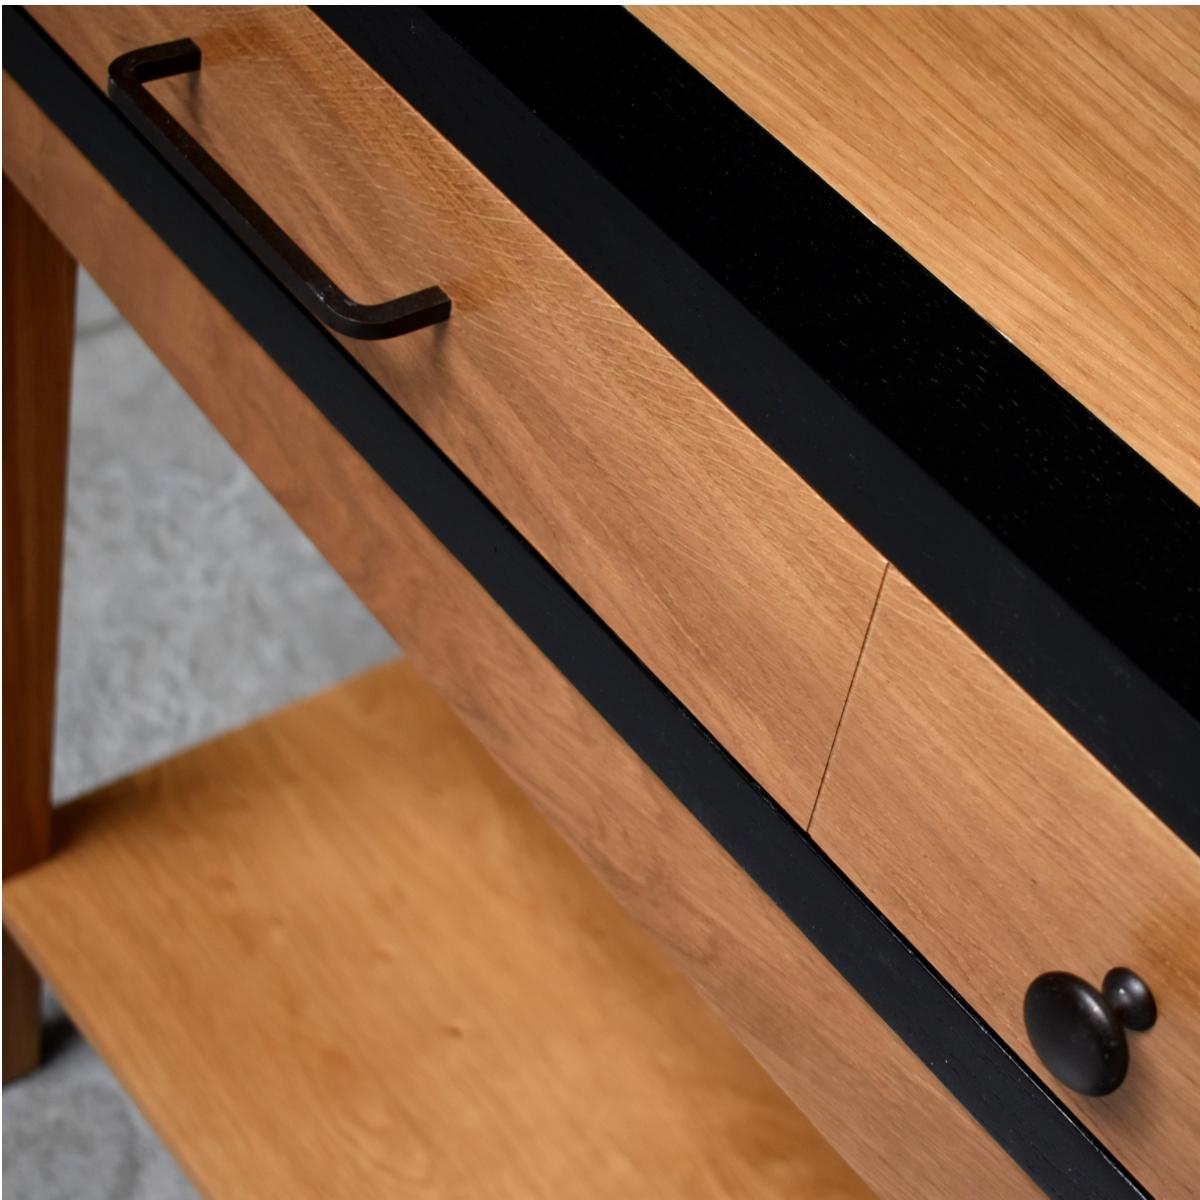 designer console table with drawers